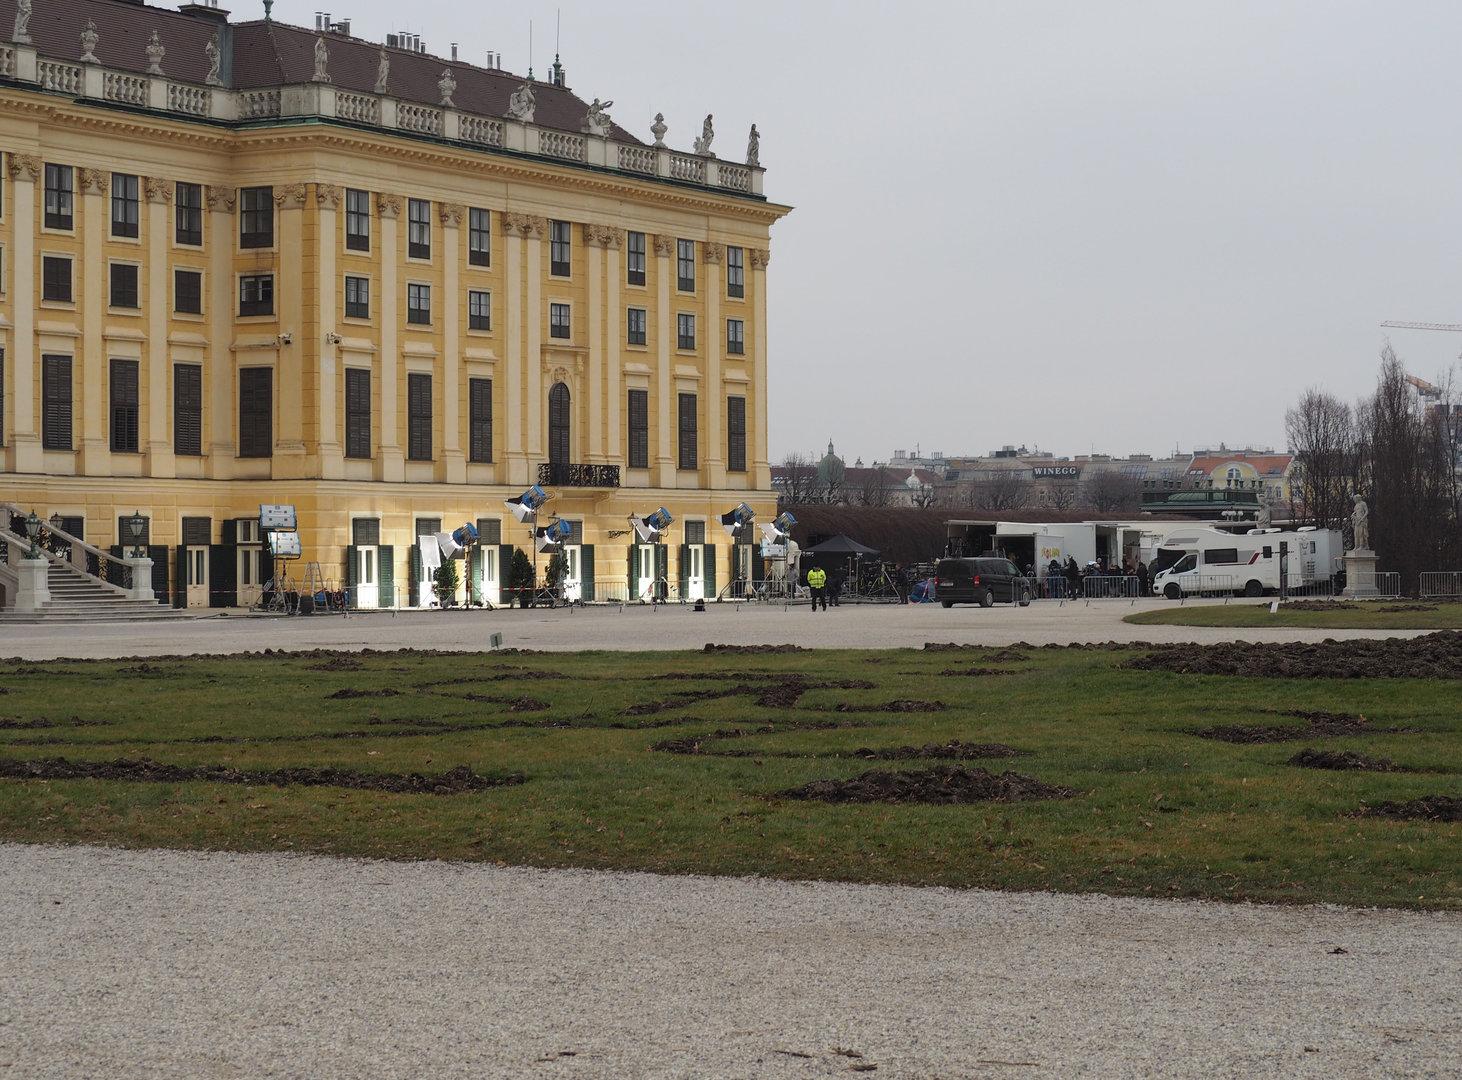 Kate Winslet left Vienna's palaces: what's next for the film location?